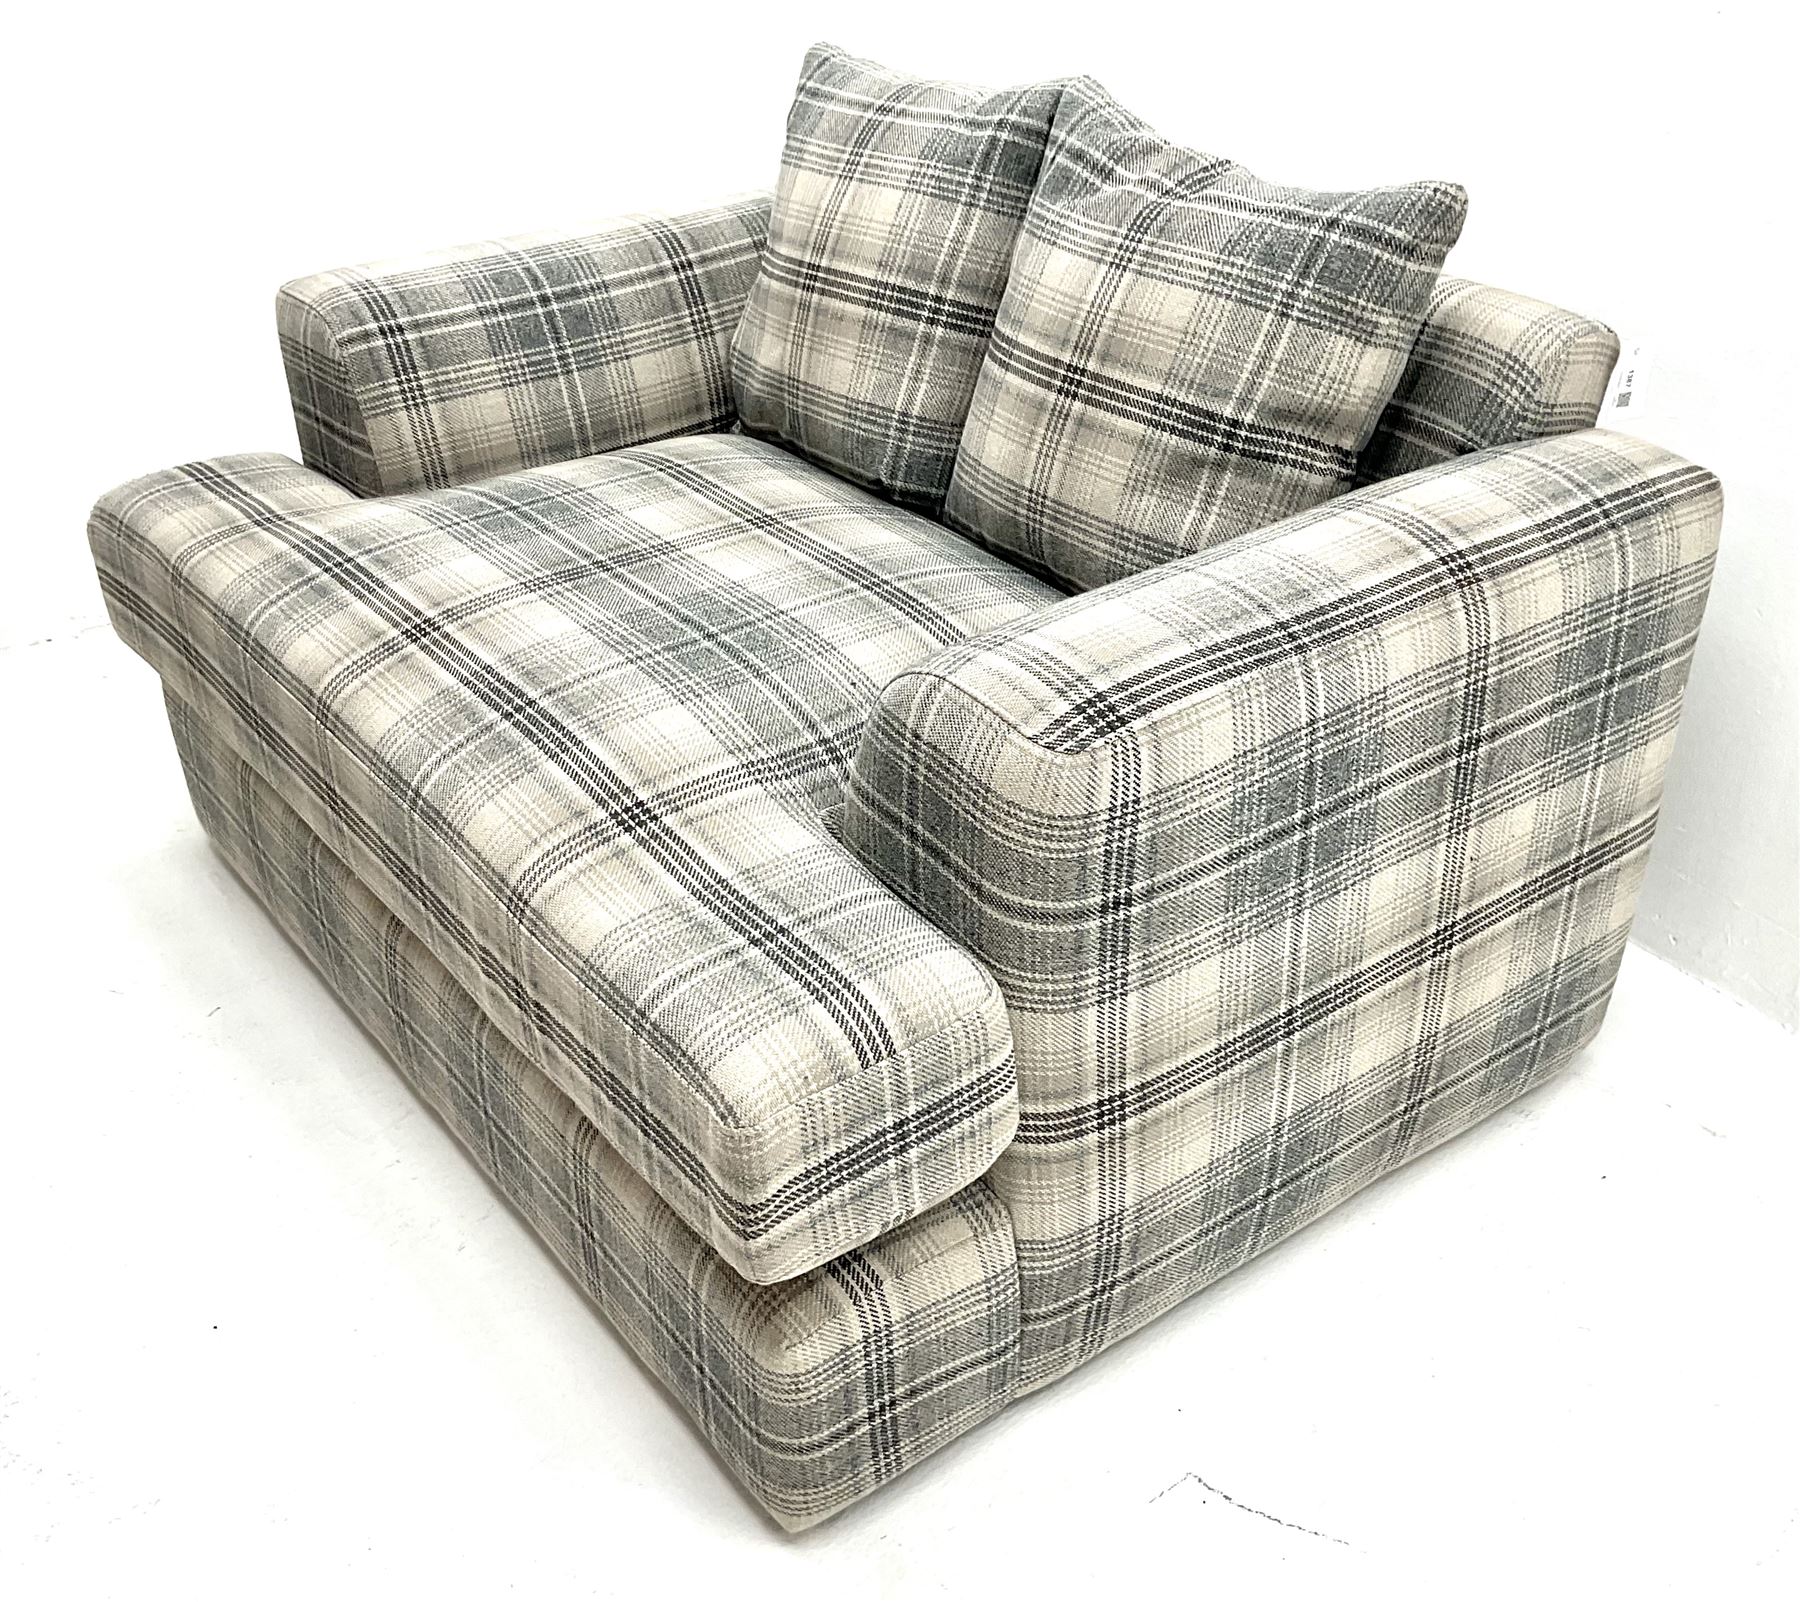 Next snuggler sofa upholstered in check fabric - Image 3 of 3